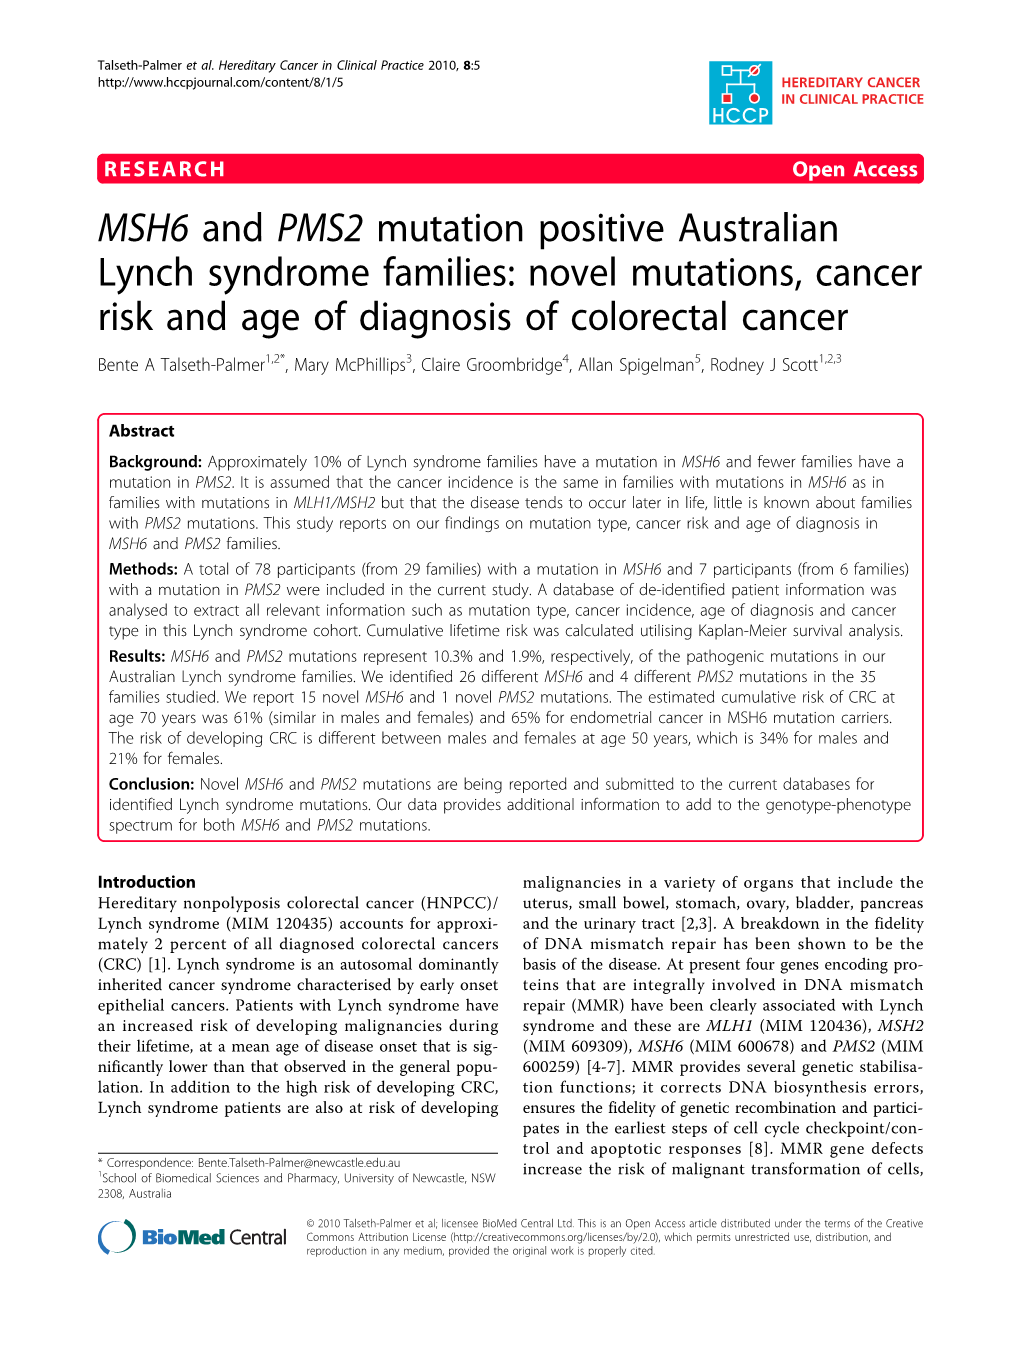 MSH6 and PMS2 Mutation Positive Australian Lynch Syndrome Families